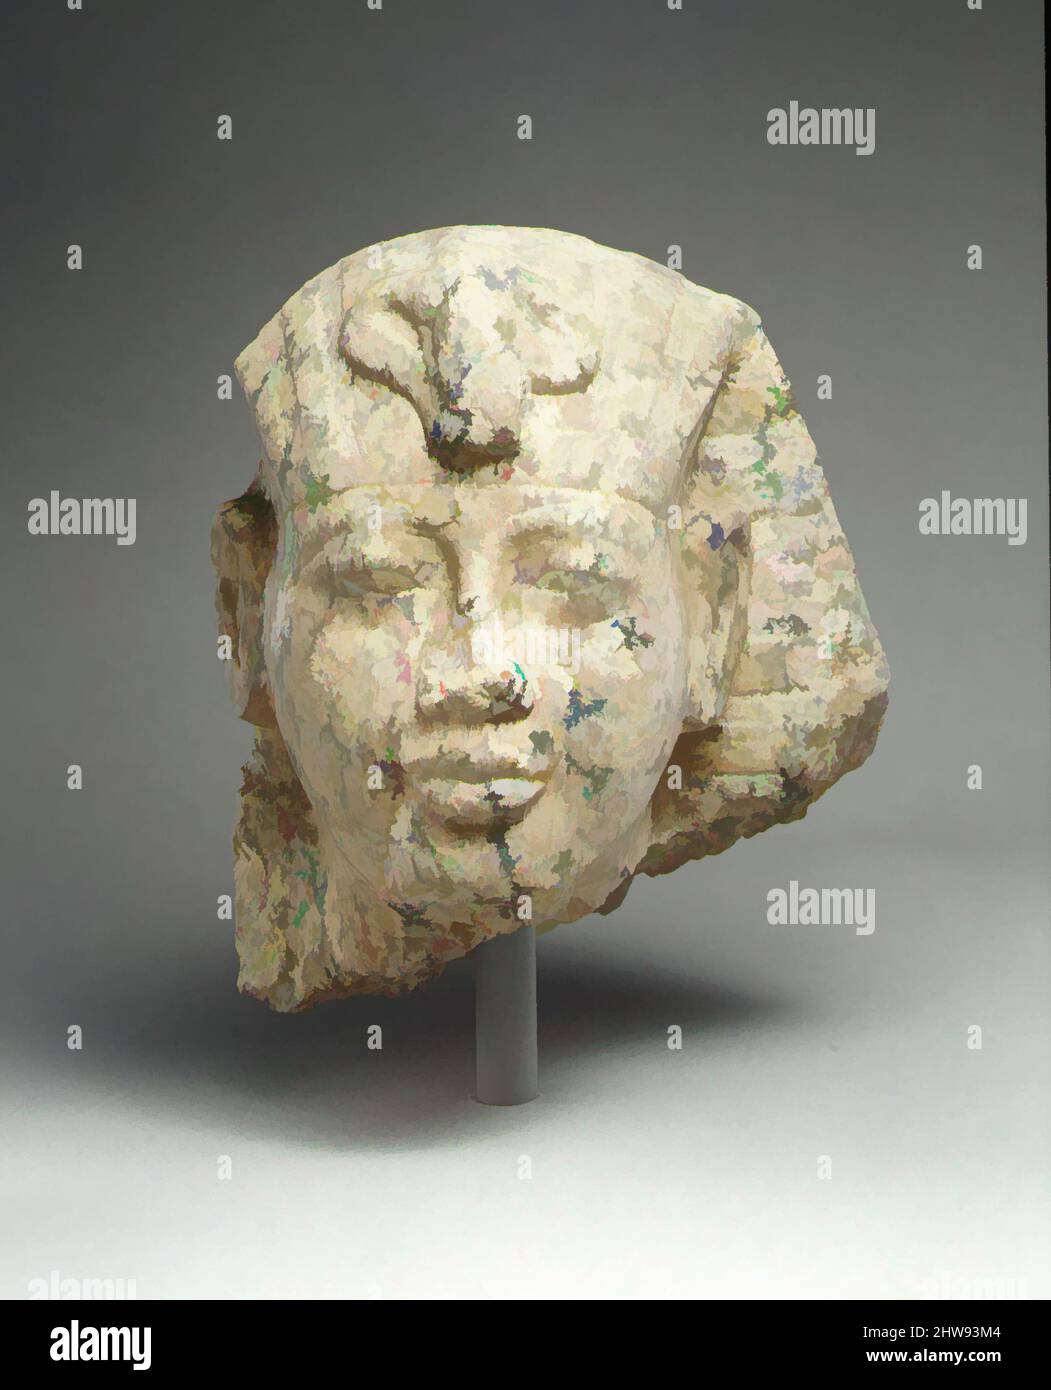 Art inspired by Amenhotep III with nemes headdress, New Kingdom, Dynasty 18, ca. 1390–1353 B.C., From Egypt, Upper Egypt, Thebes, Deir el-Bahri, 1922–23, Granite, H. 26.5 cm (10 7/16 in.); W. 21.5 cm (8 7/16 in.); D. 21 cm (8 1/4 in, Classic works modernized by Artotop with a splash of modernity. Shapes, color and value, eye-catching visual impact on art. Emotions through freedom of artworks in a contemporary way. A timeless message pursuing a wildly creative new direction. Artists turning to the digital medium and creating the Artotop NFT Stock Photo